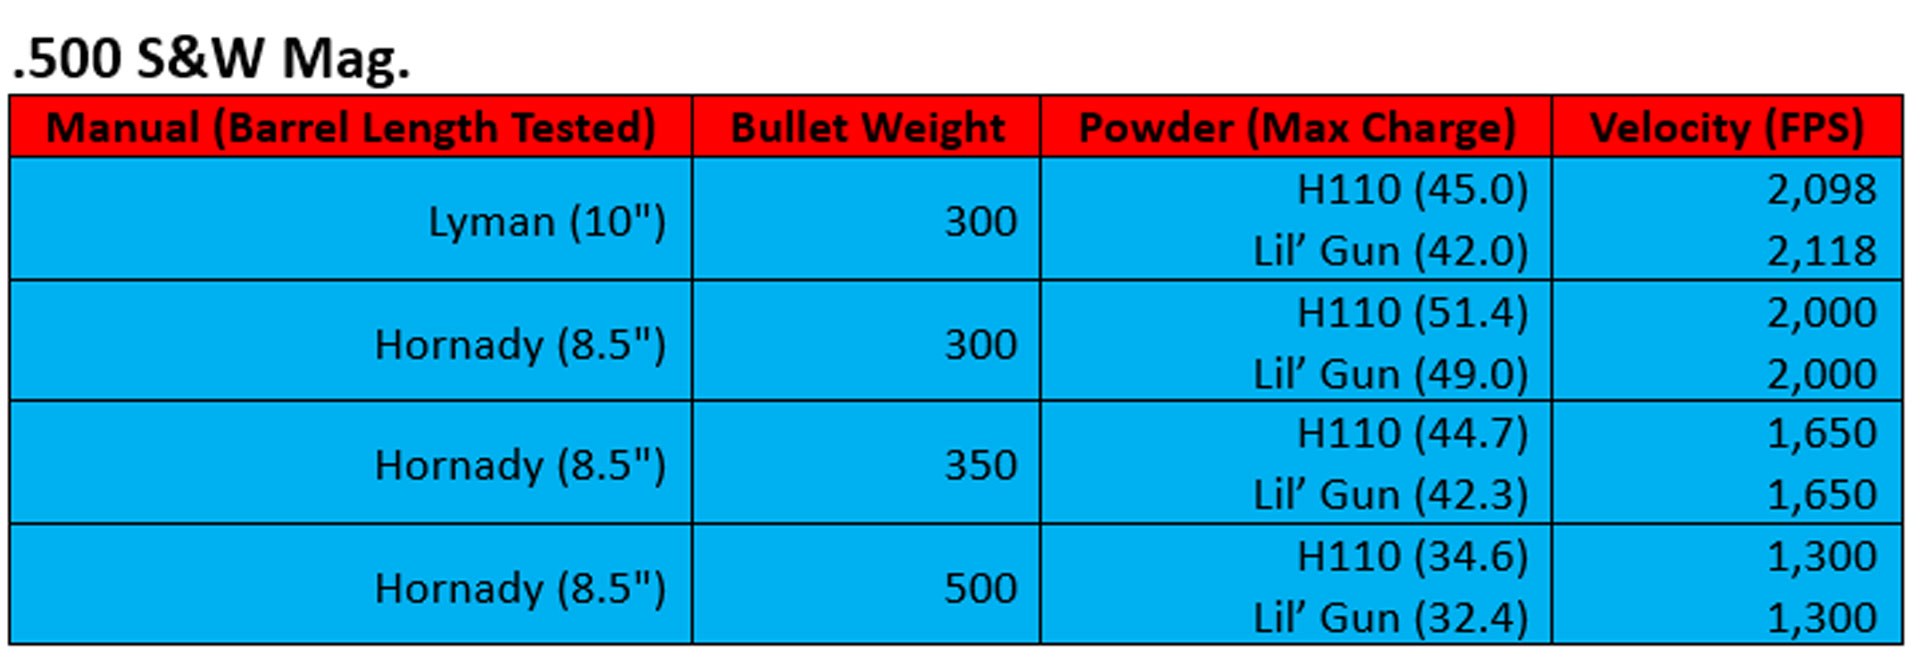 500 S&W Table